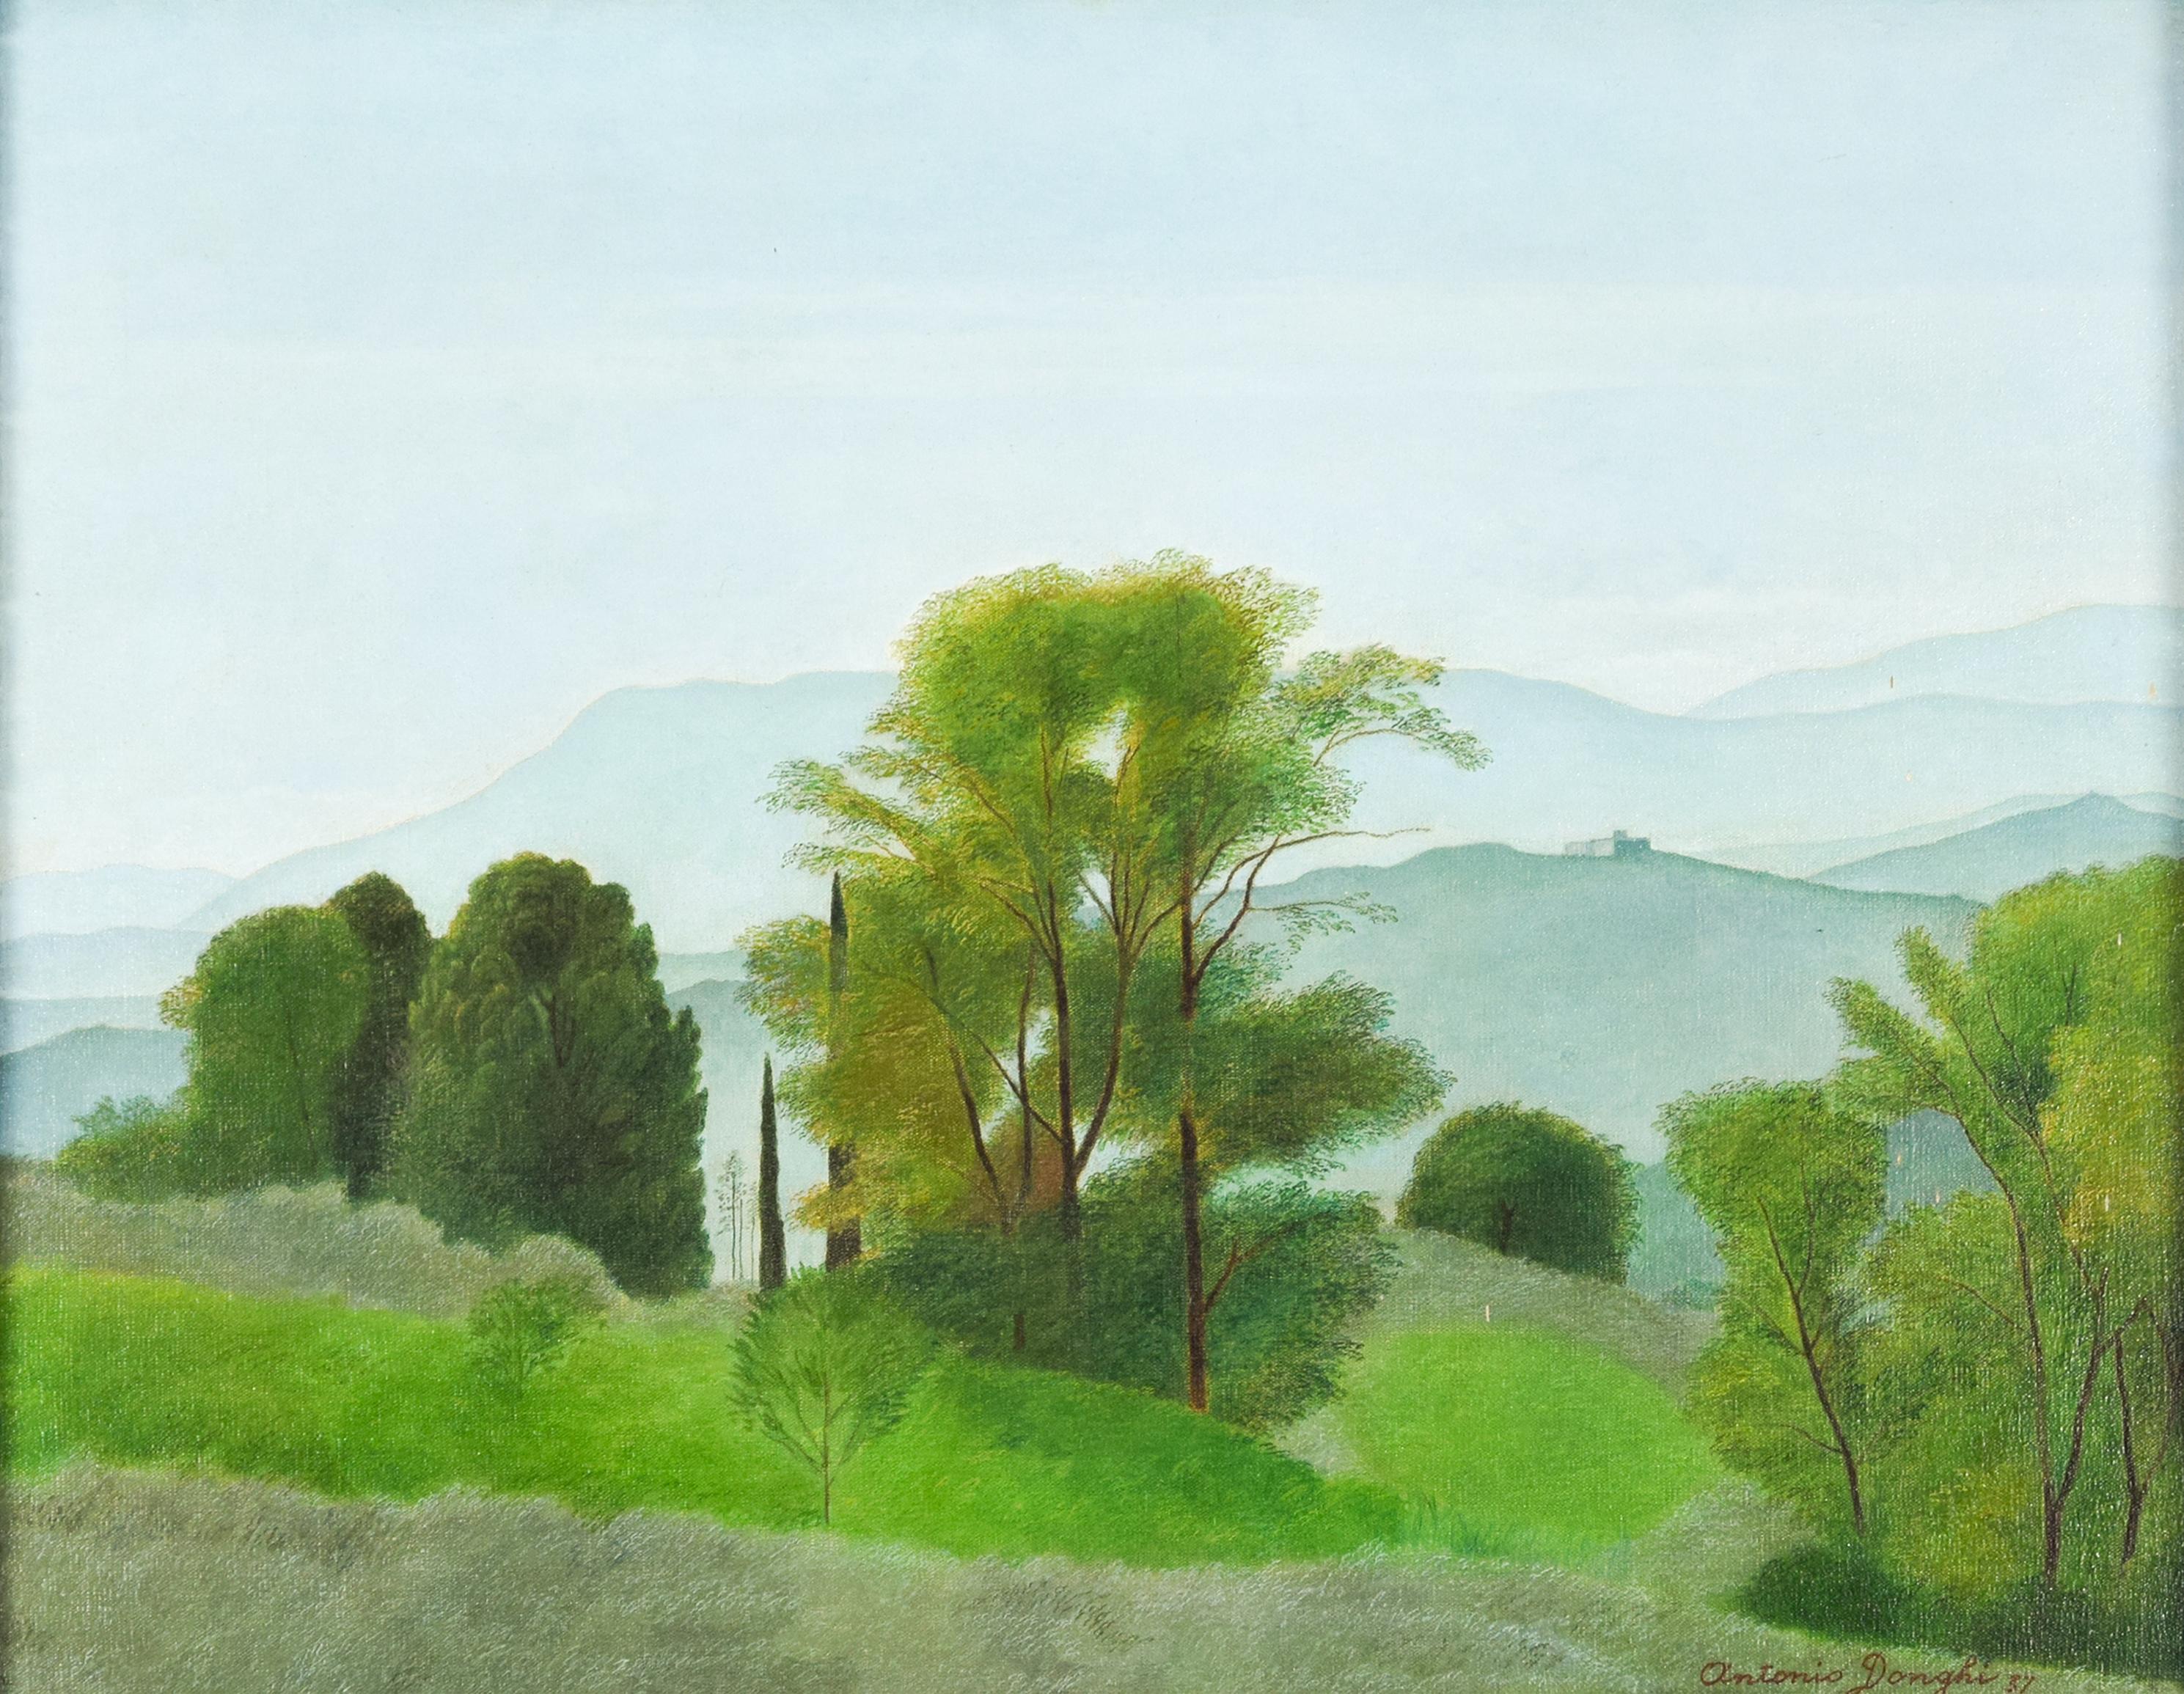 Antonio Donghi Landscape Painting - Landscape - Oil on Canvas by A. Donghi - 1937